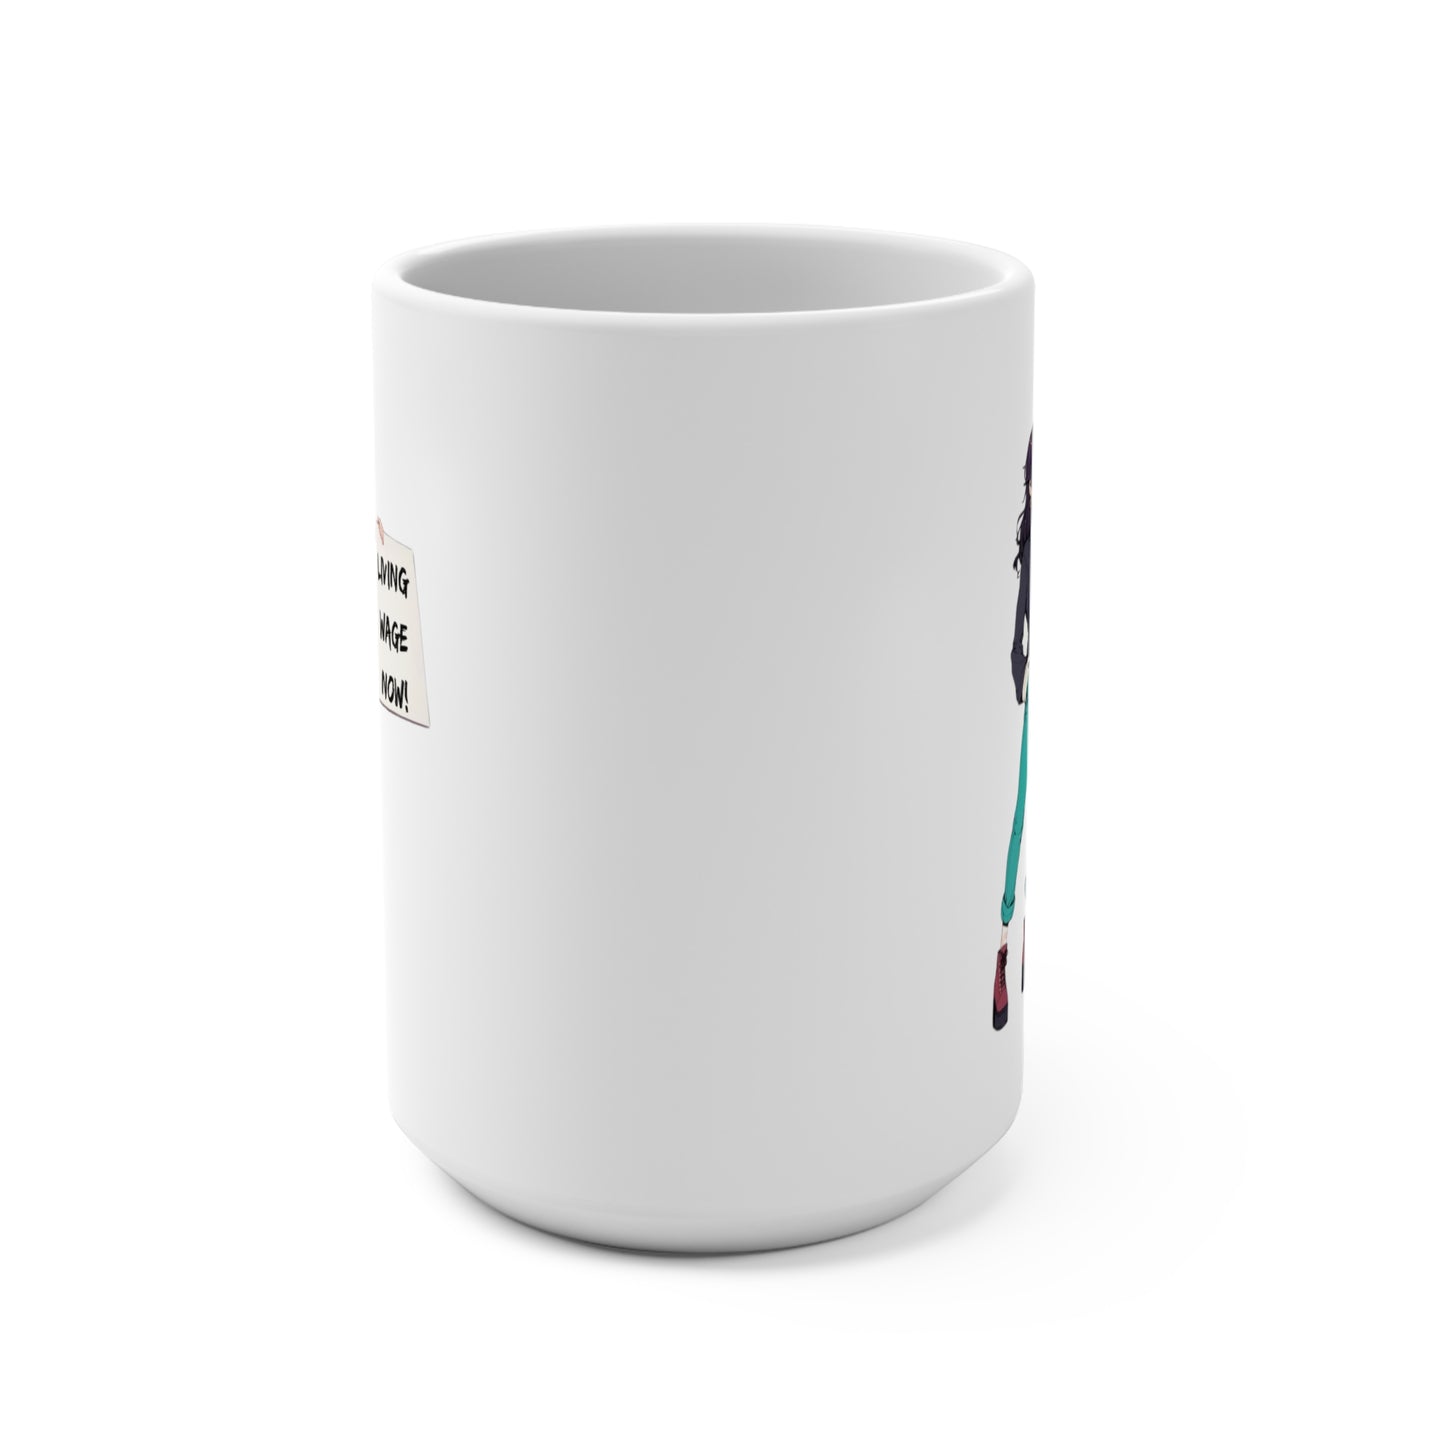 Living Wage Now! Inspirational Anime Statement Coffee Mug (15oz): Protest/Demand, Be an Activism! Say what you mean!